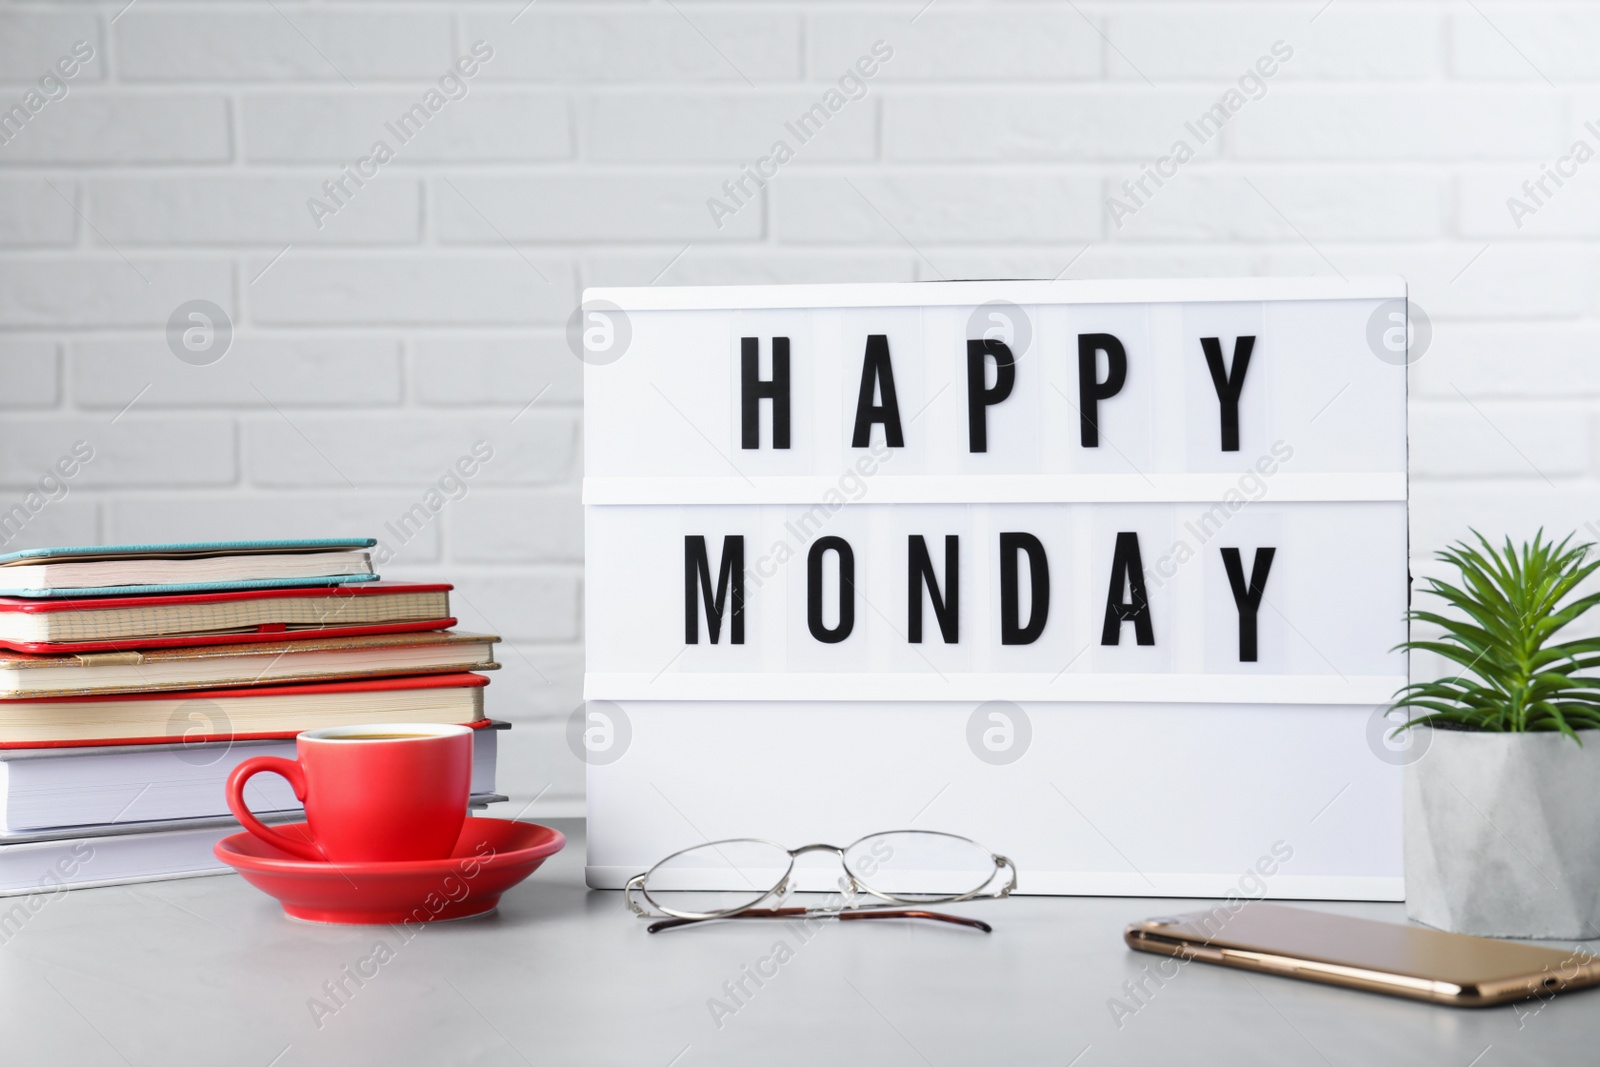 Photo of Light box with message Happy Monday, office stationery and cup of coffee on desk